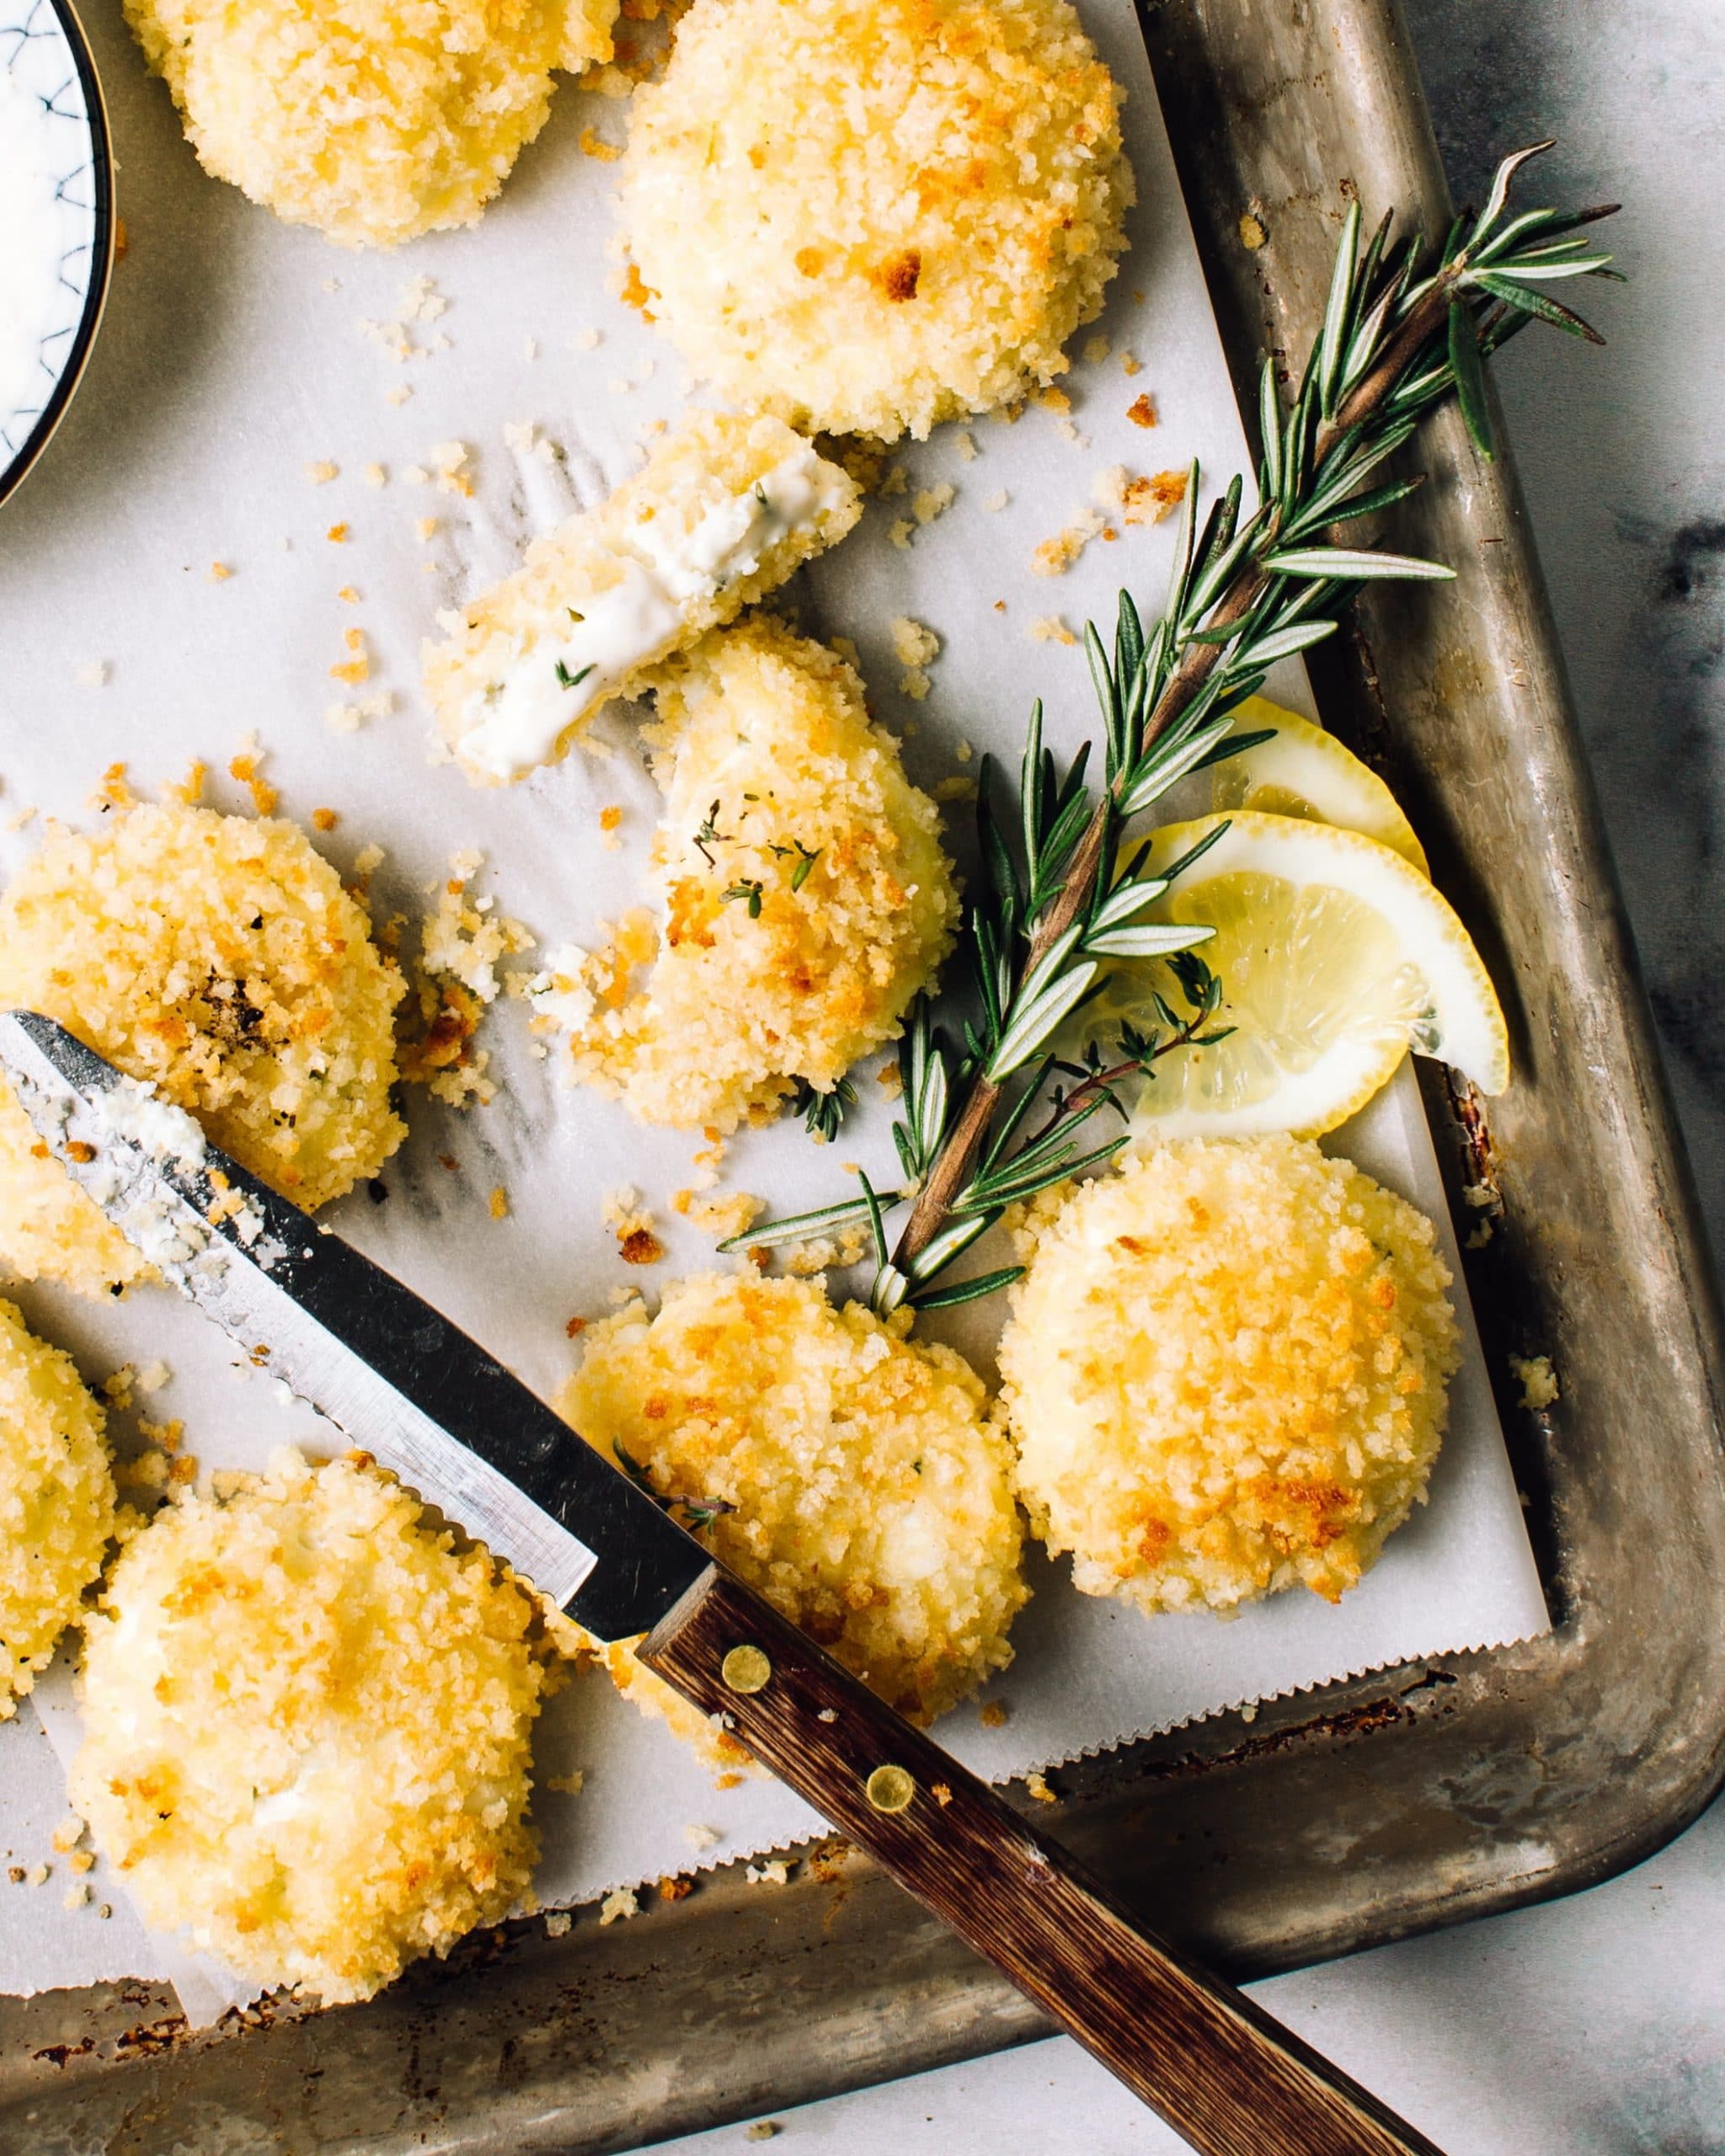 Baked Goat Cheese Fritters with Herbs Recipe